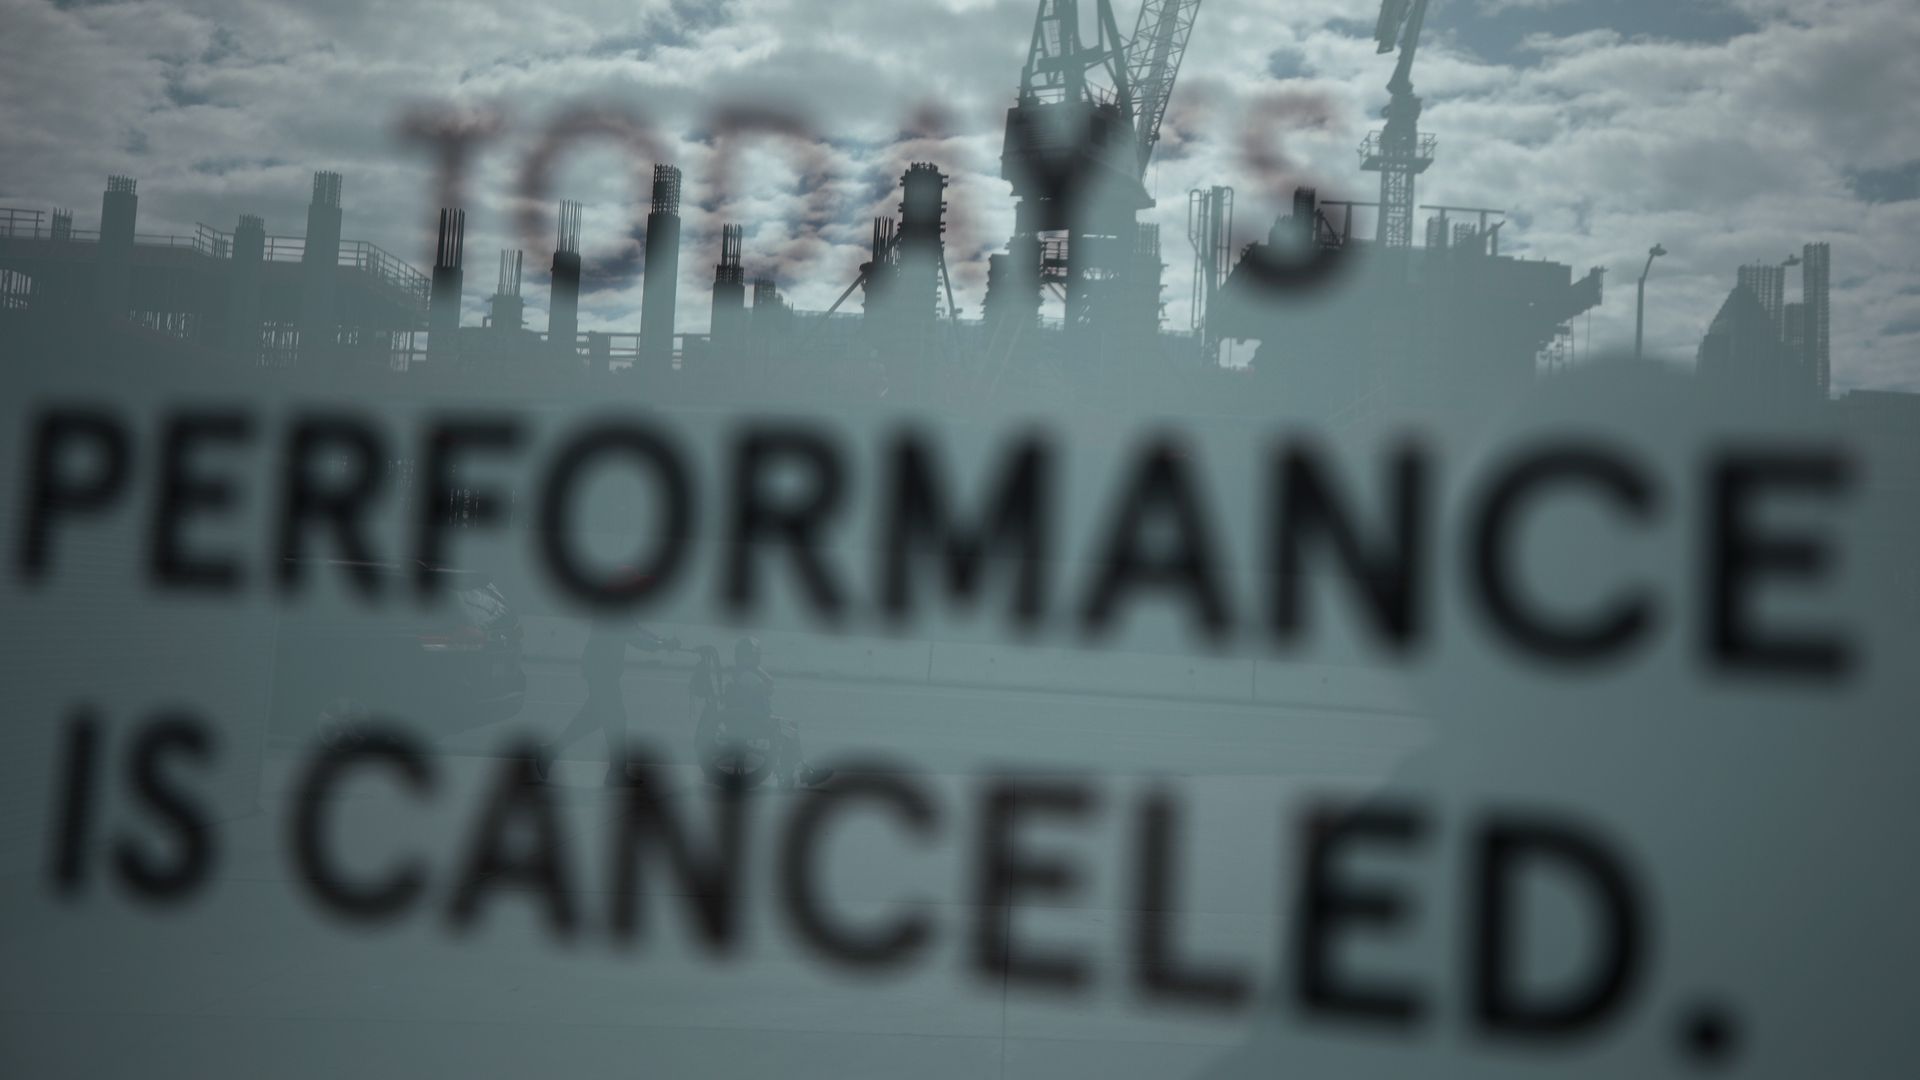 A sign reads 'Today's Performance Is Canceled' at the shuttered Walt Disney Concert Hall